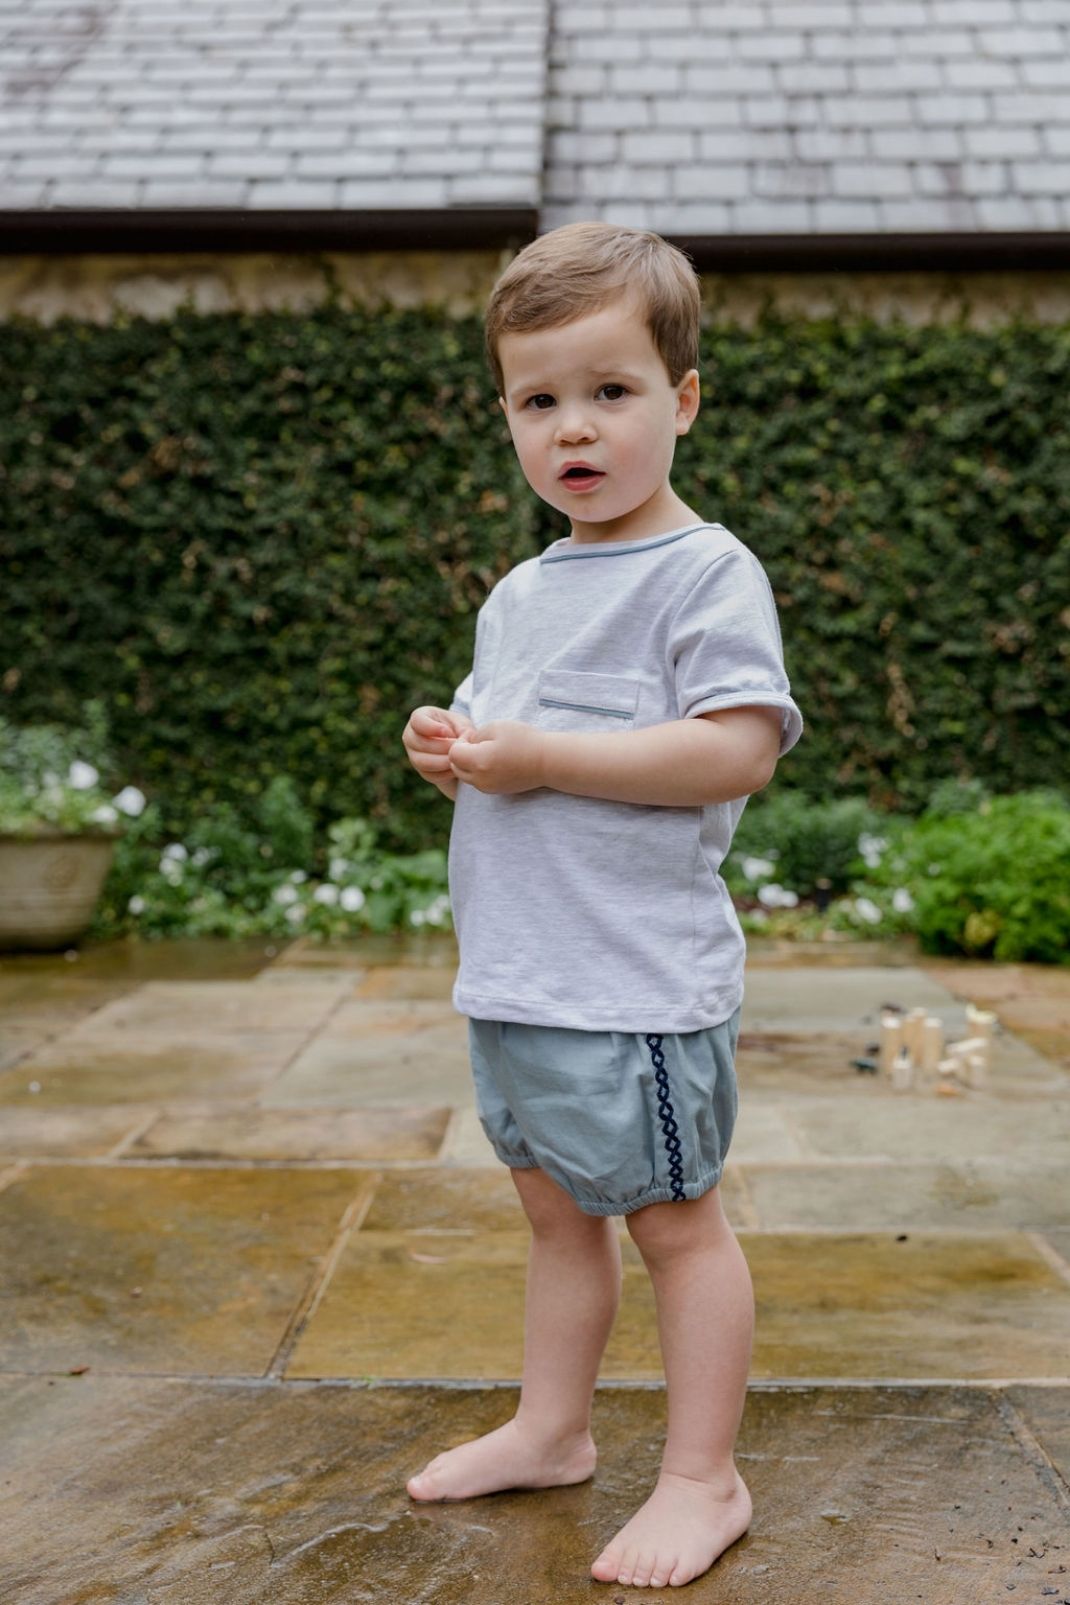 Lifestyle shot of little boy outside wearing a tee shirt and shorts